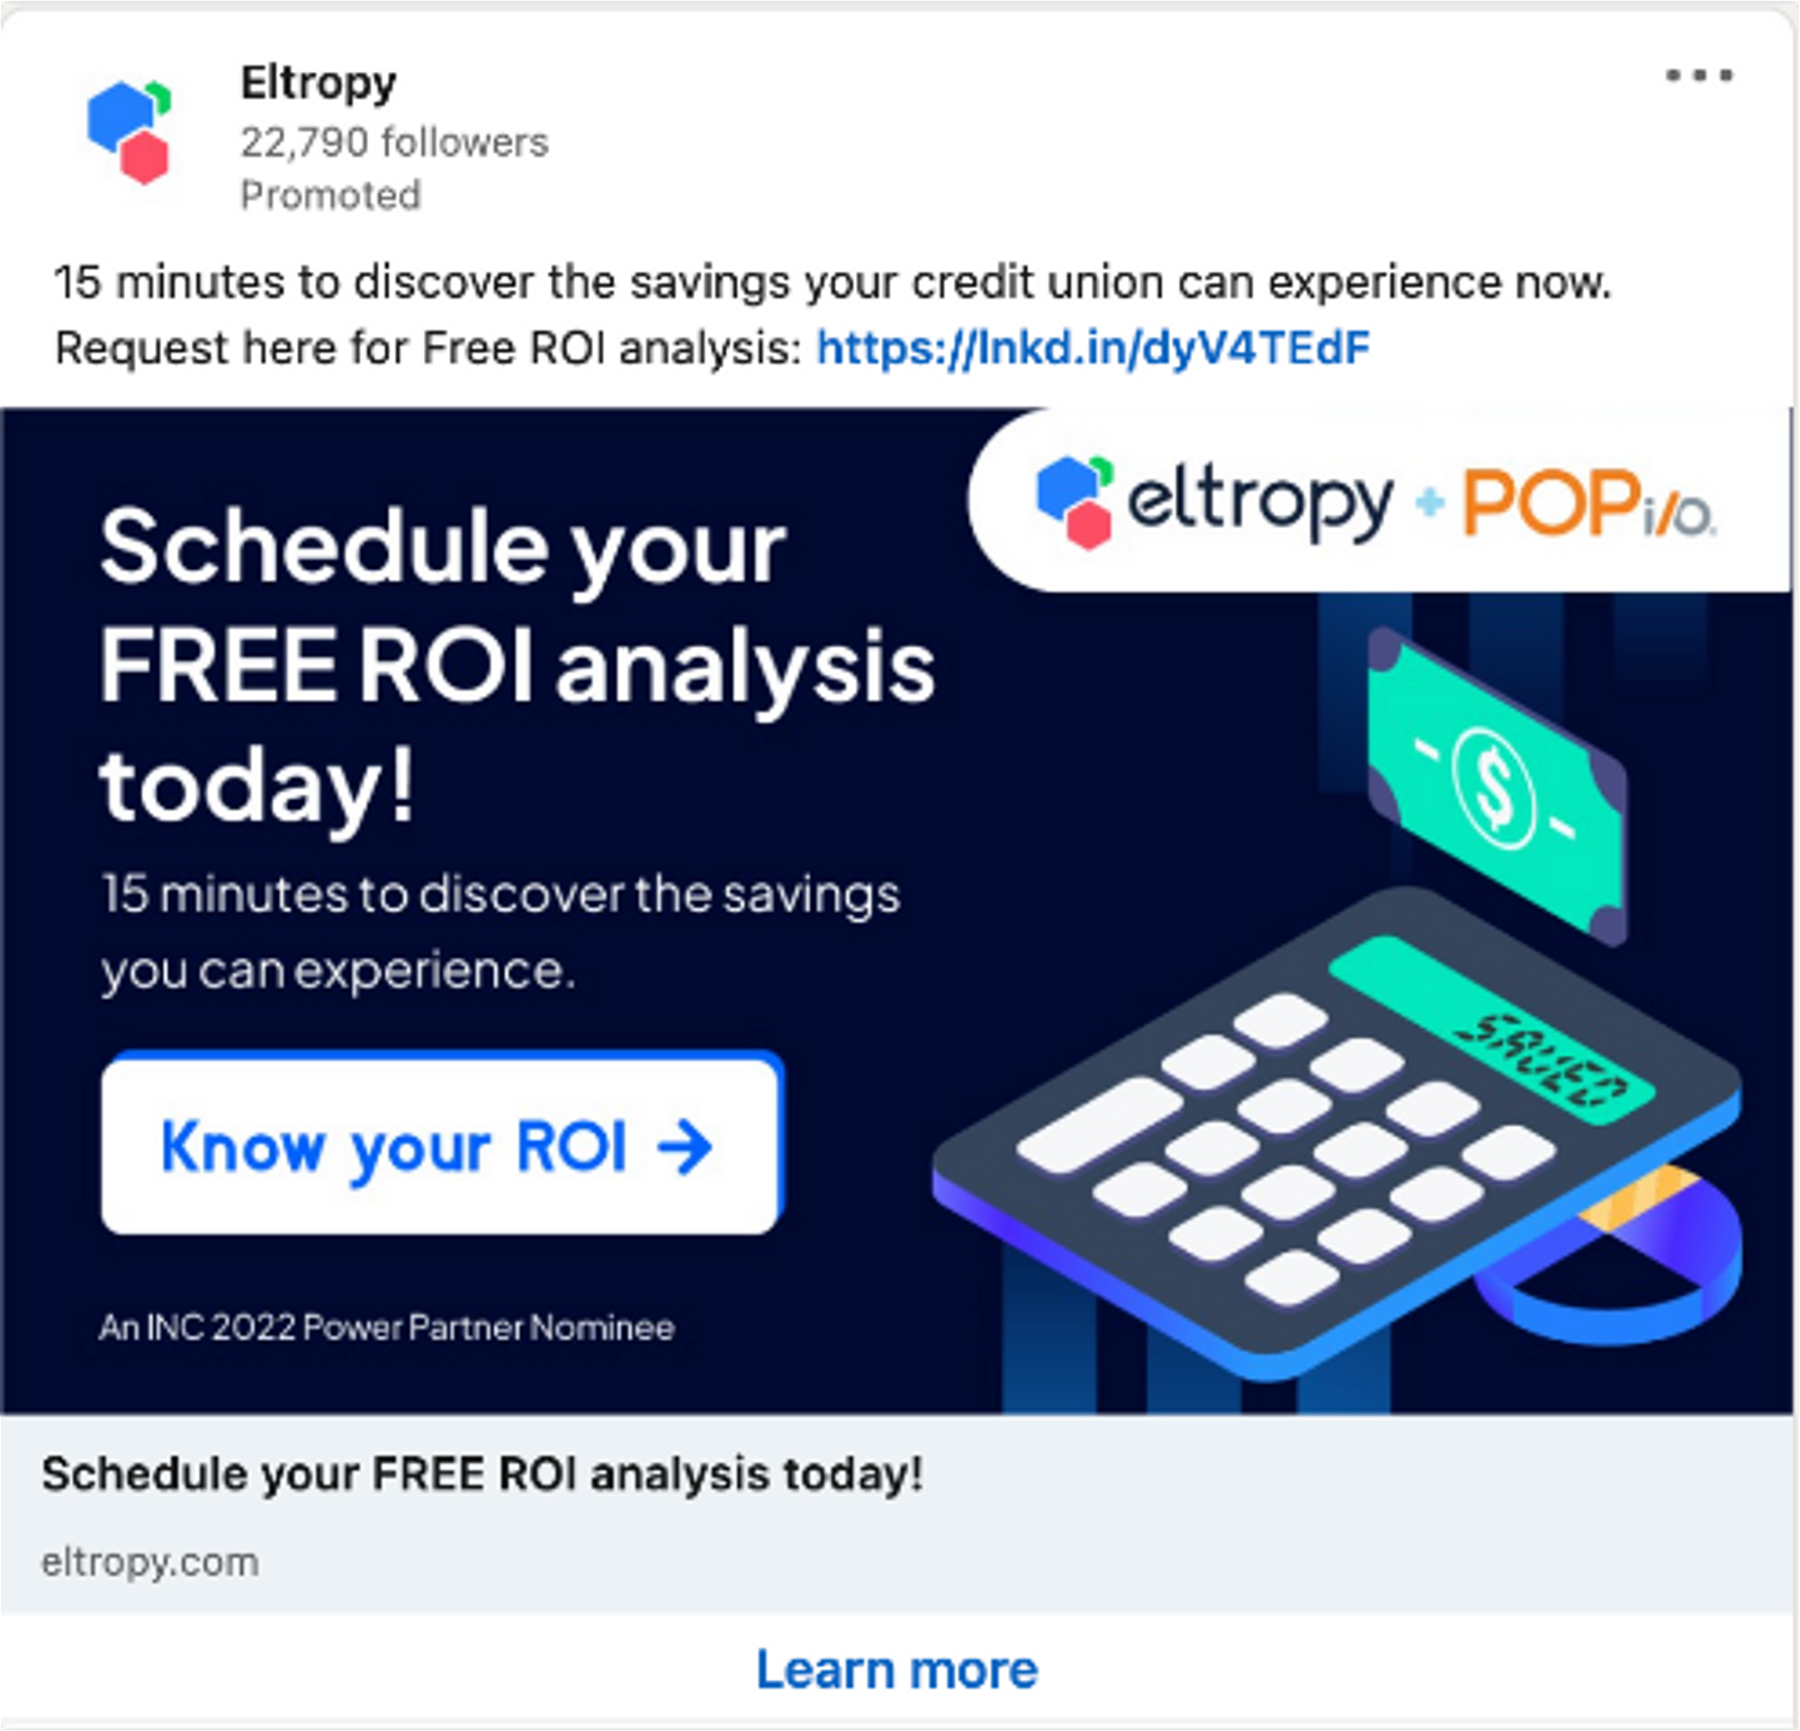 Eltropy uses lead-form ads to promote its services.